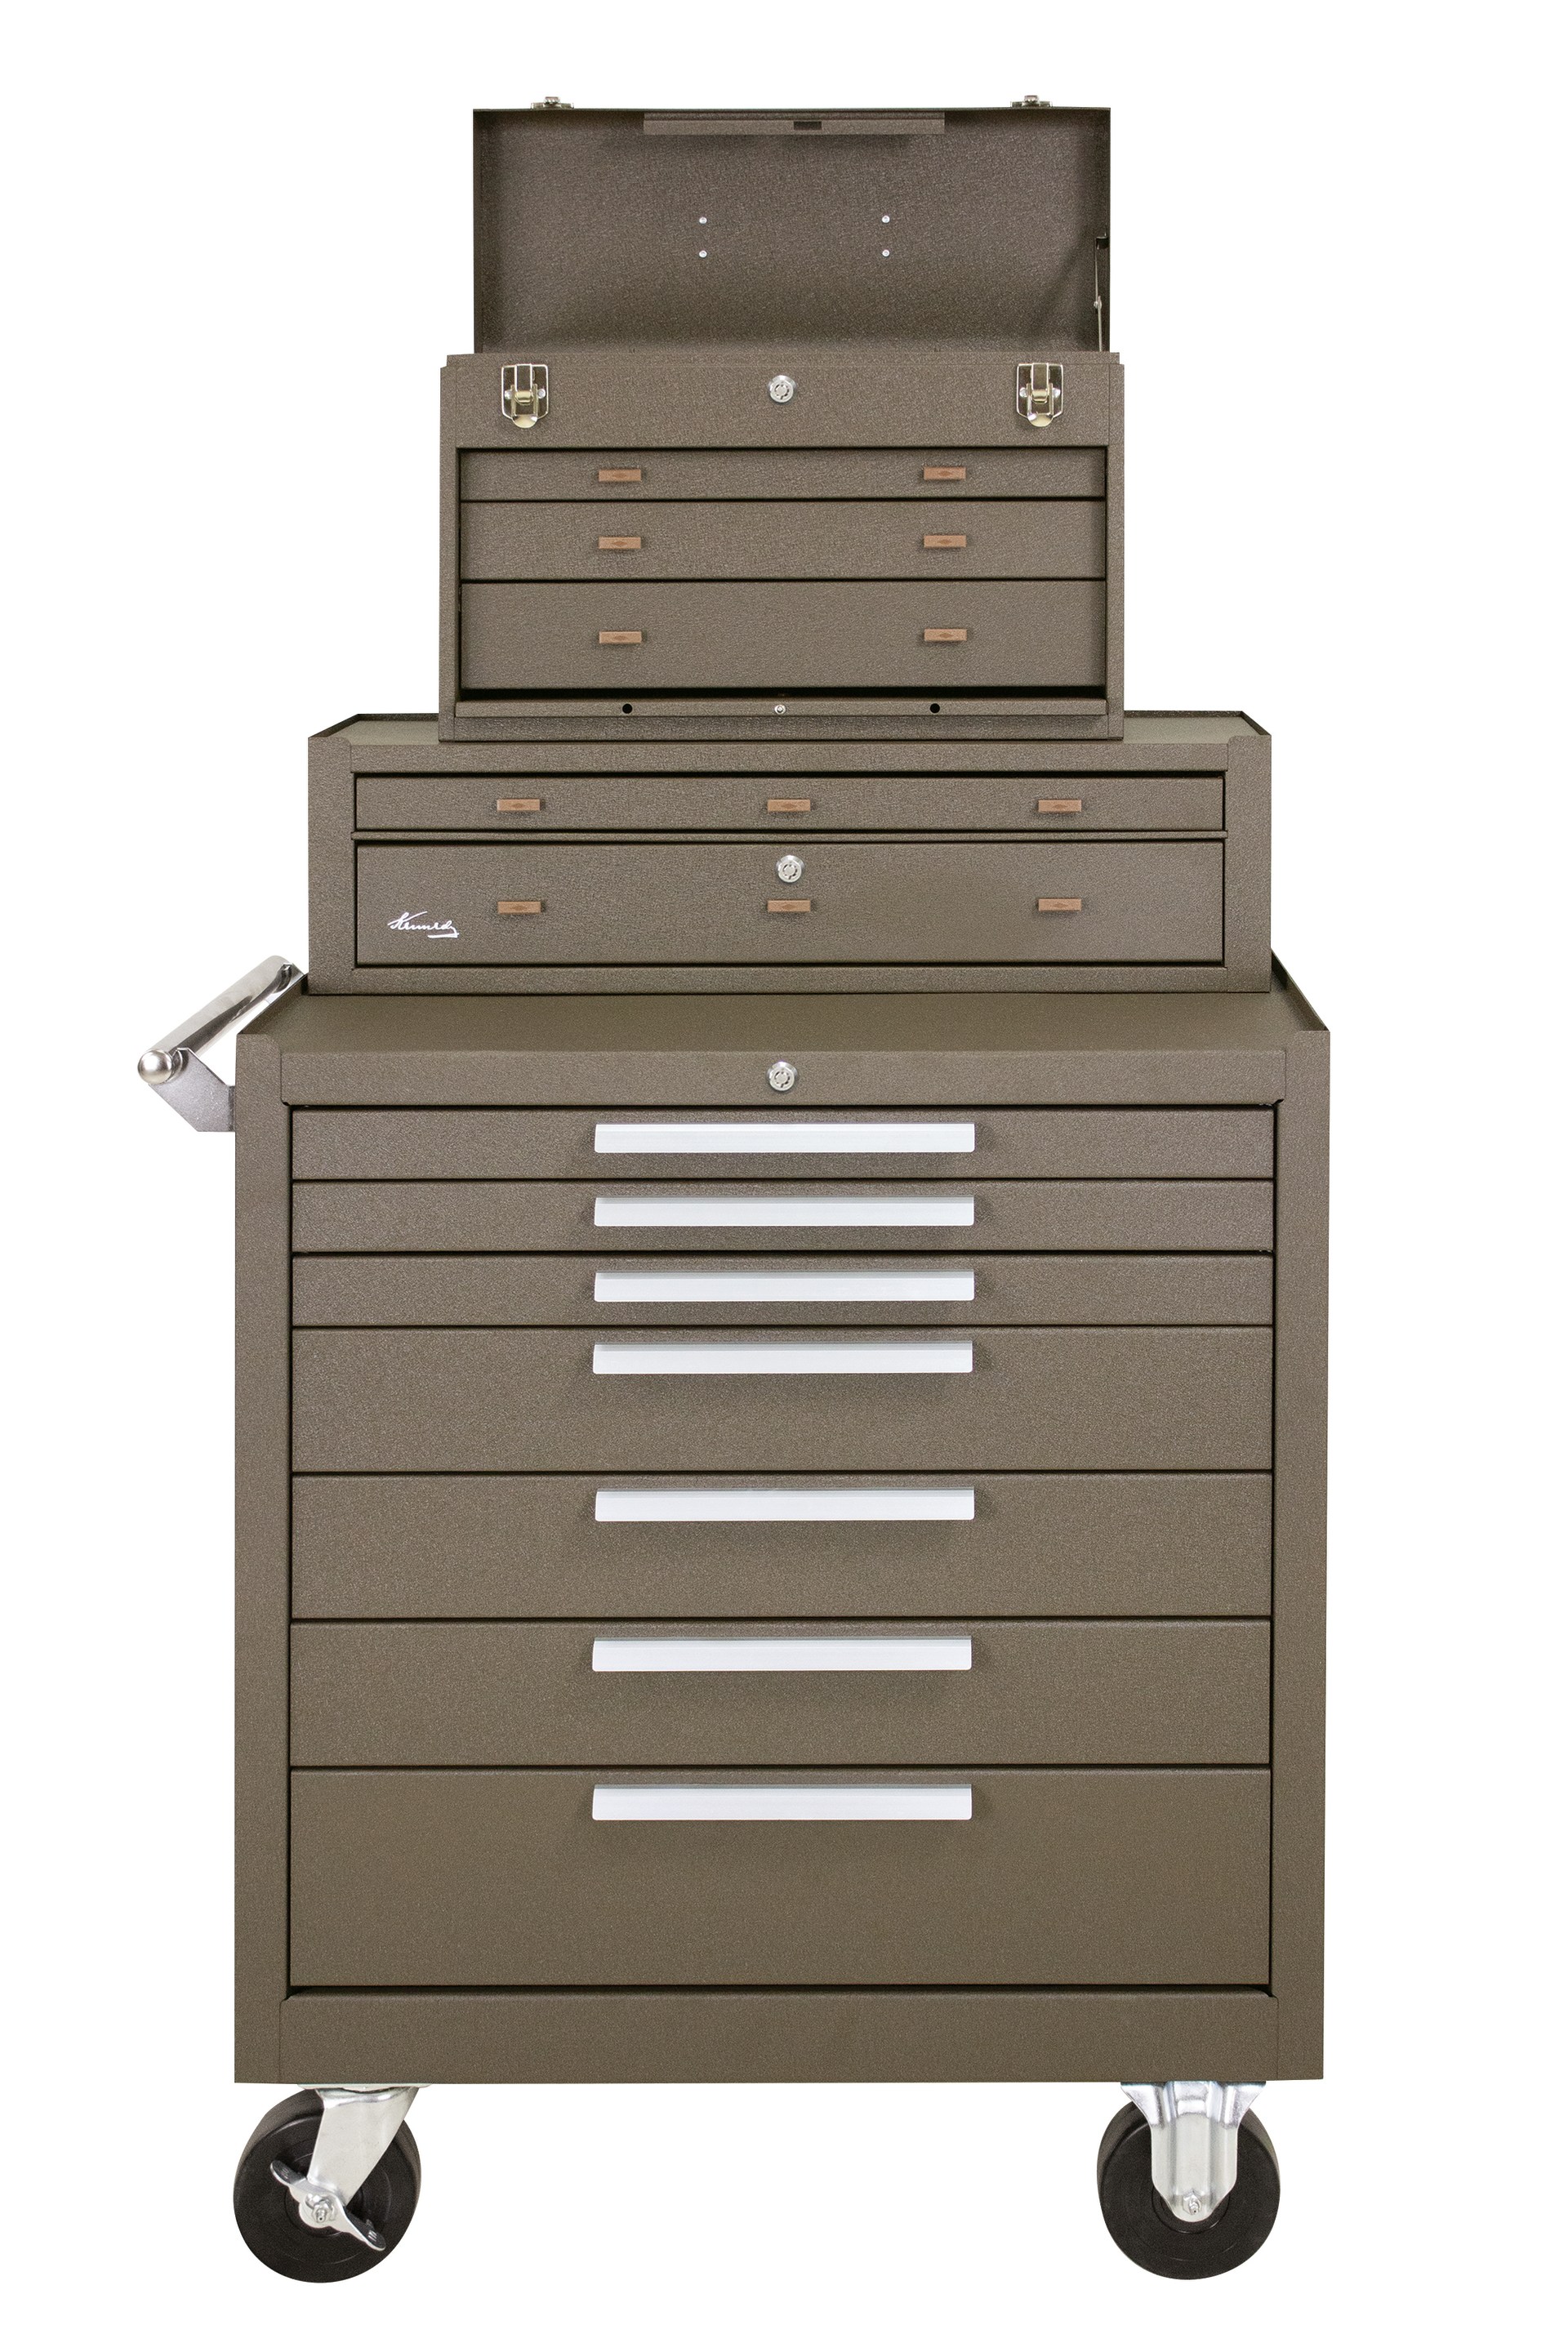 Kennedy - Tool Chest: 7 Drawers, 8-1/2″ OAD, 13-5/8″ OAH, 20-1/8